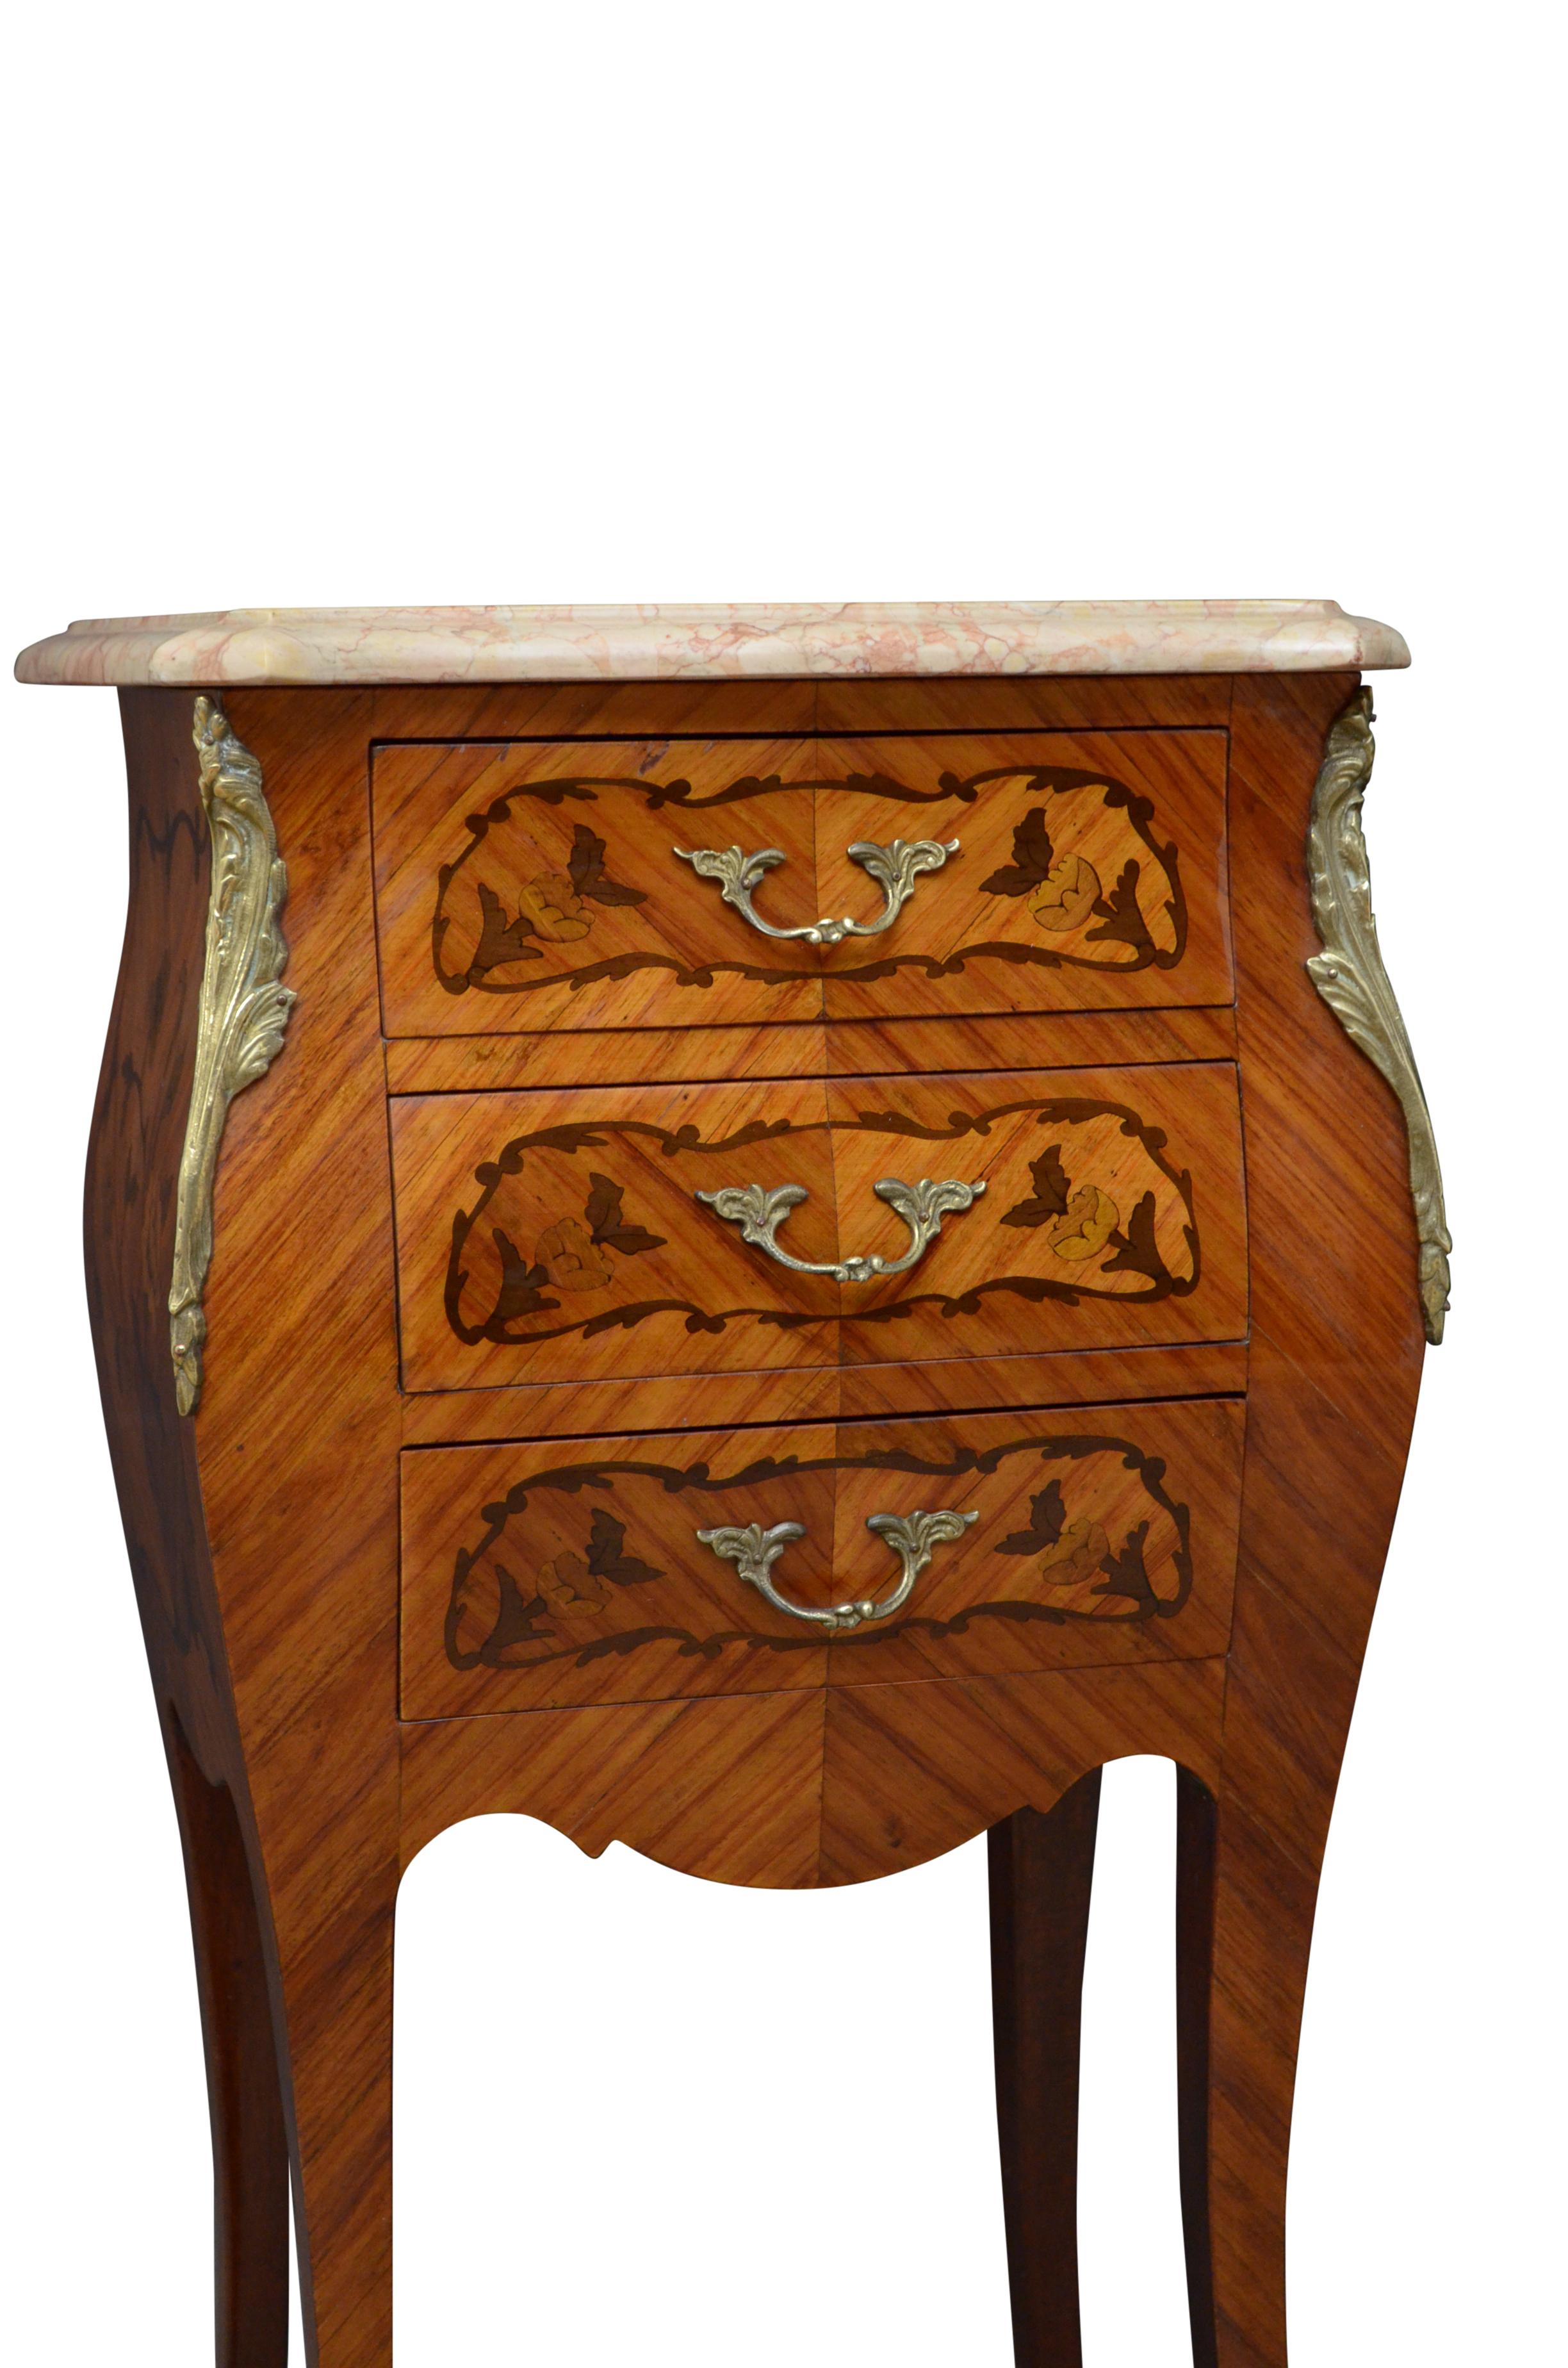 Kingwood Pair of French Bedside Cabinets